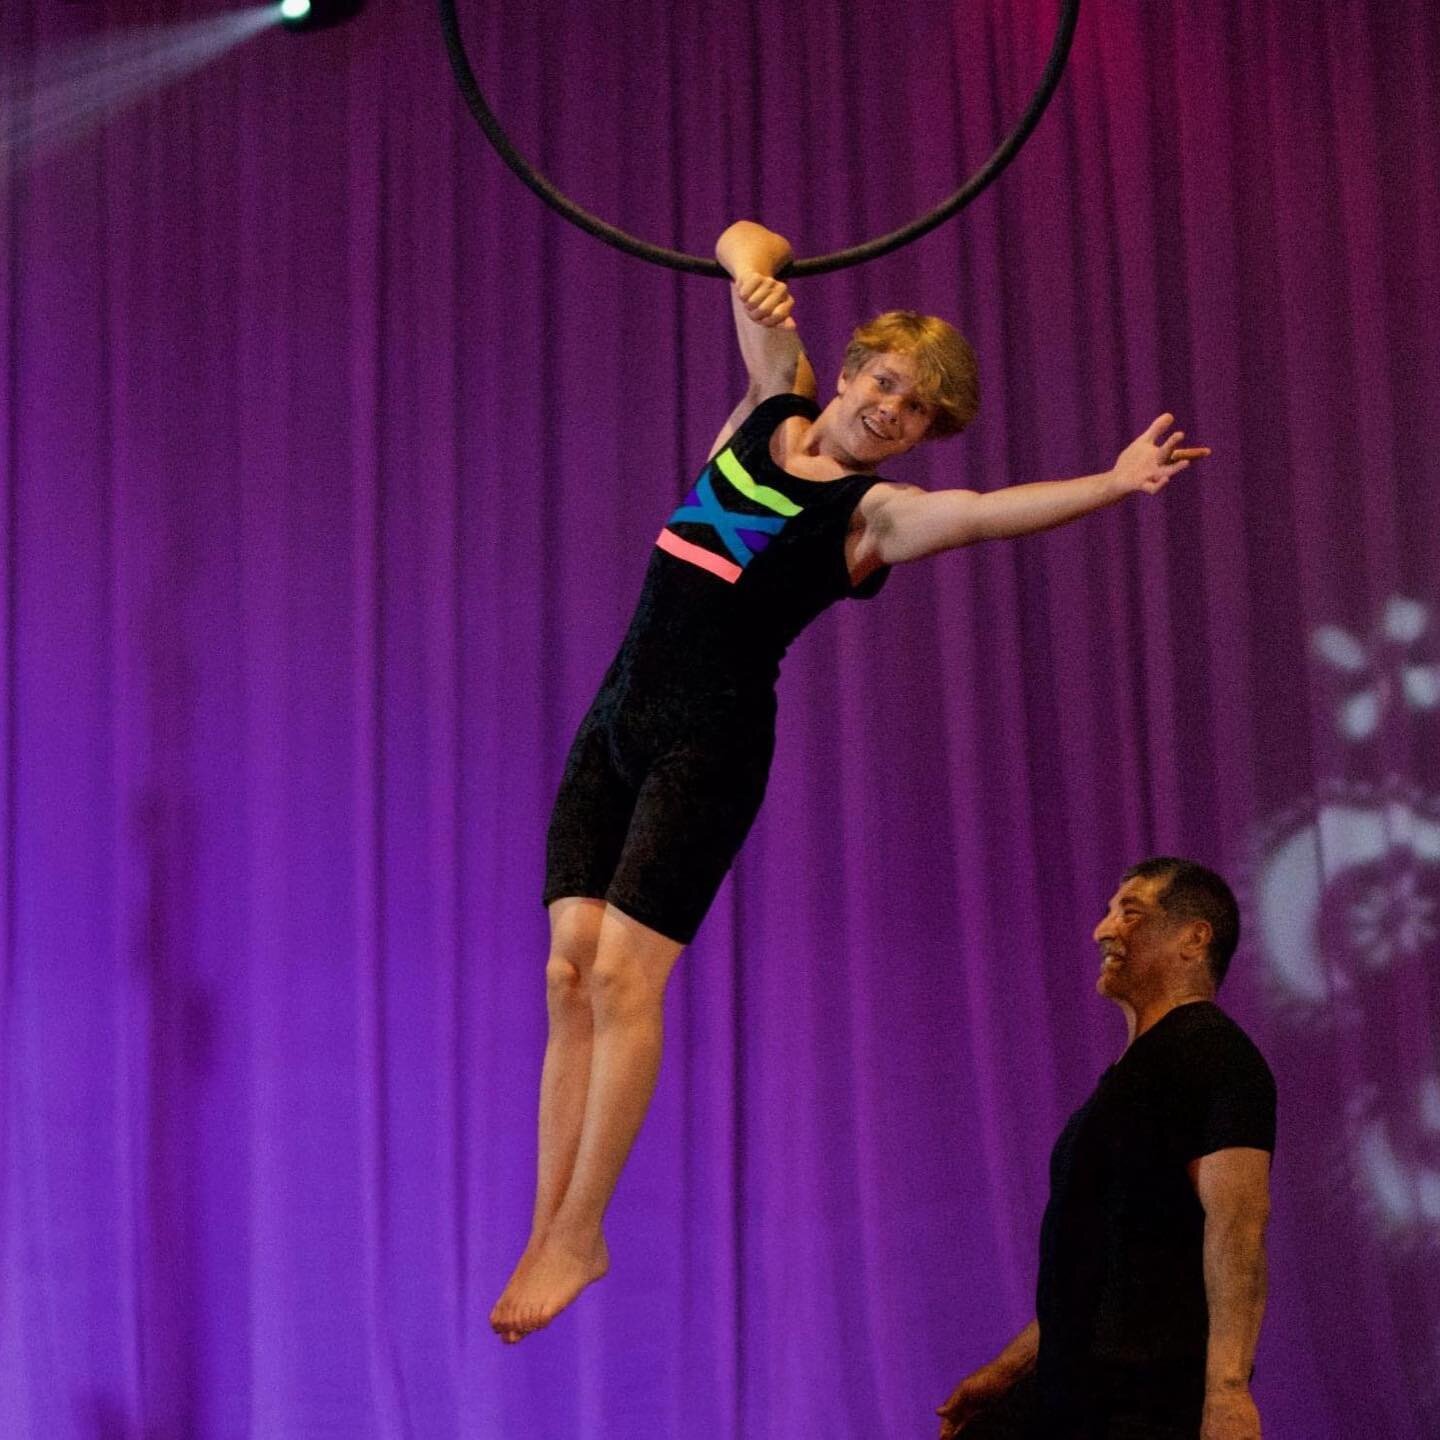 Only two shows left!!! 

#docircus #greatycircus #ccac #circus #youthcircus #redlands #circusinredlands #aycophotocontest